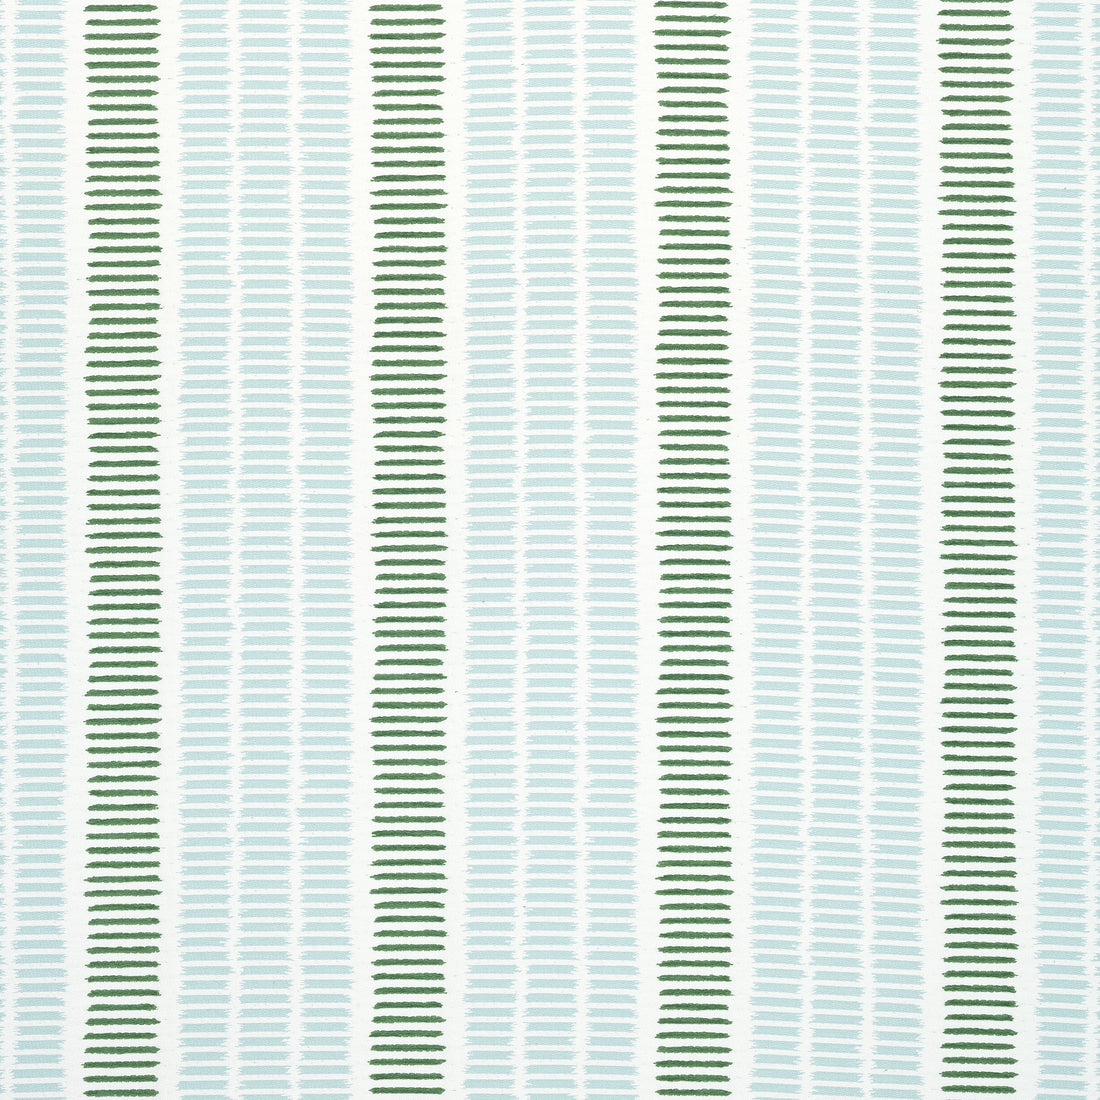 Topsail Stripe fabric in seafoam and kelly green color - pattern number W73517 - by Thibaut in the Landmark collection